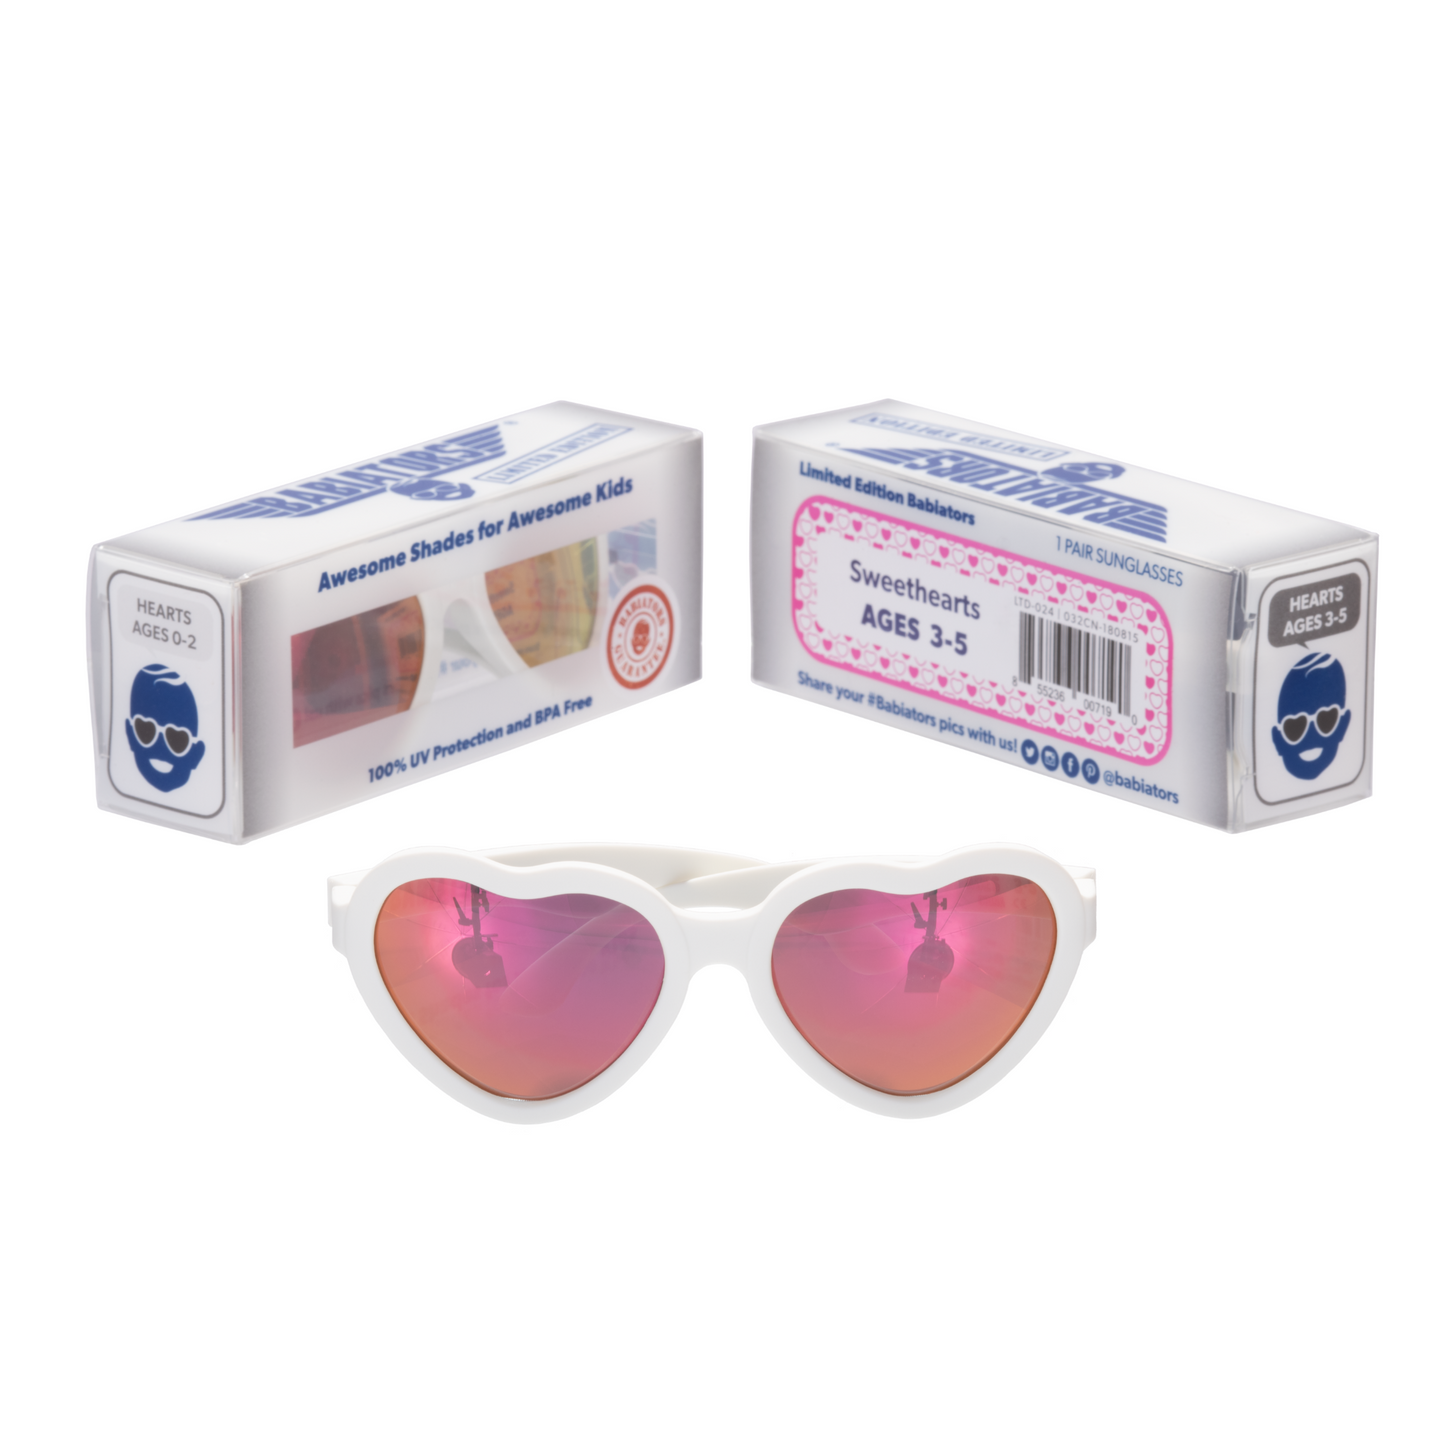 Limited Edition | Non-Polarized Mirrored Heart Sunglasses | The Sweetheart